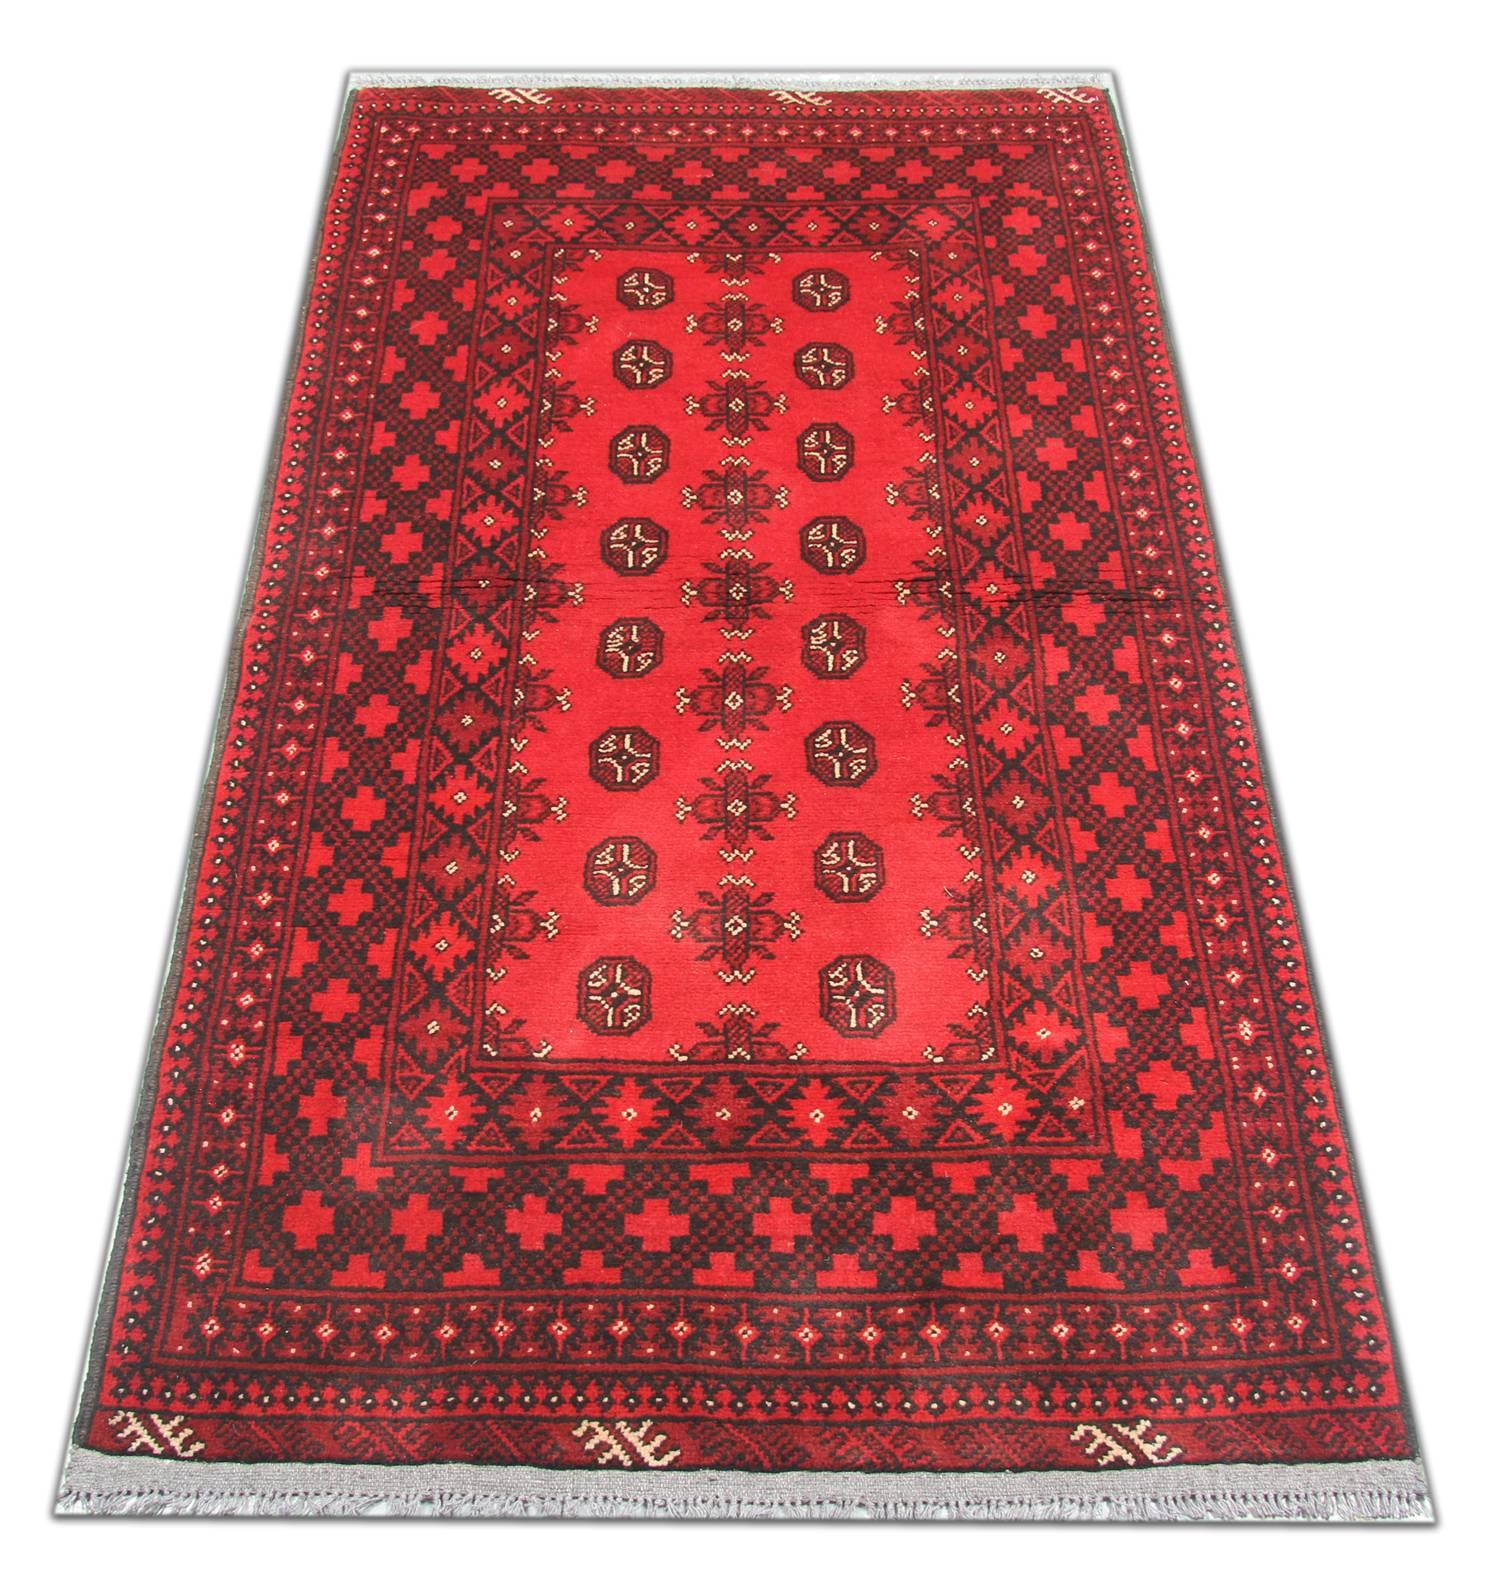 This is an example of a fine Afghan red rug made by highly skilled Turkman handmade rugs weavers in the north of Afghanistan. They have used hand-spun wool and 100% organic dyes for the production of these wool rugs. This tribal rug has repeating